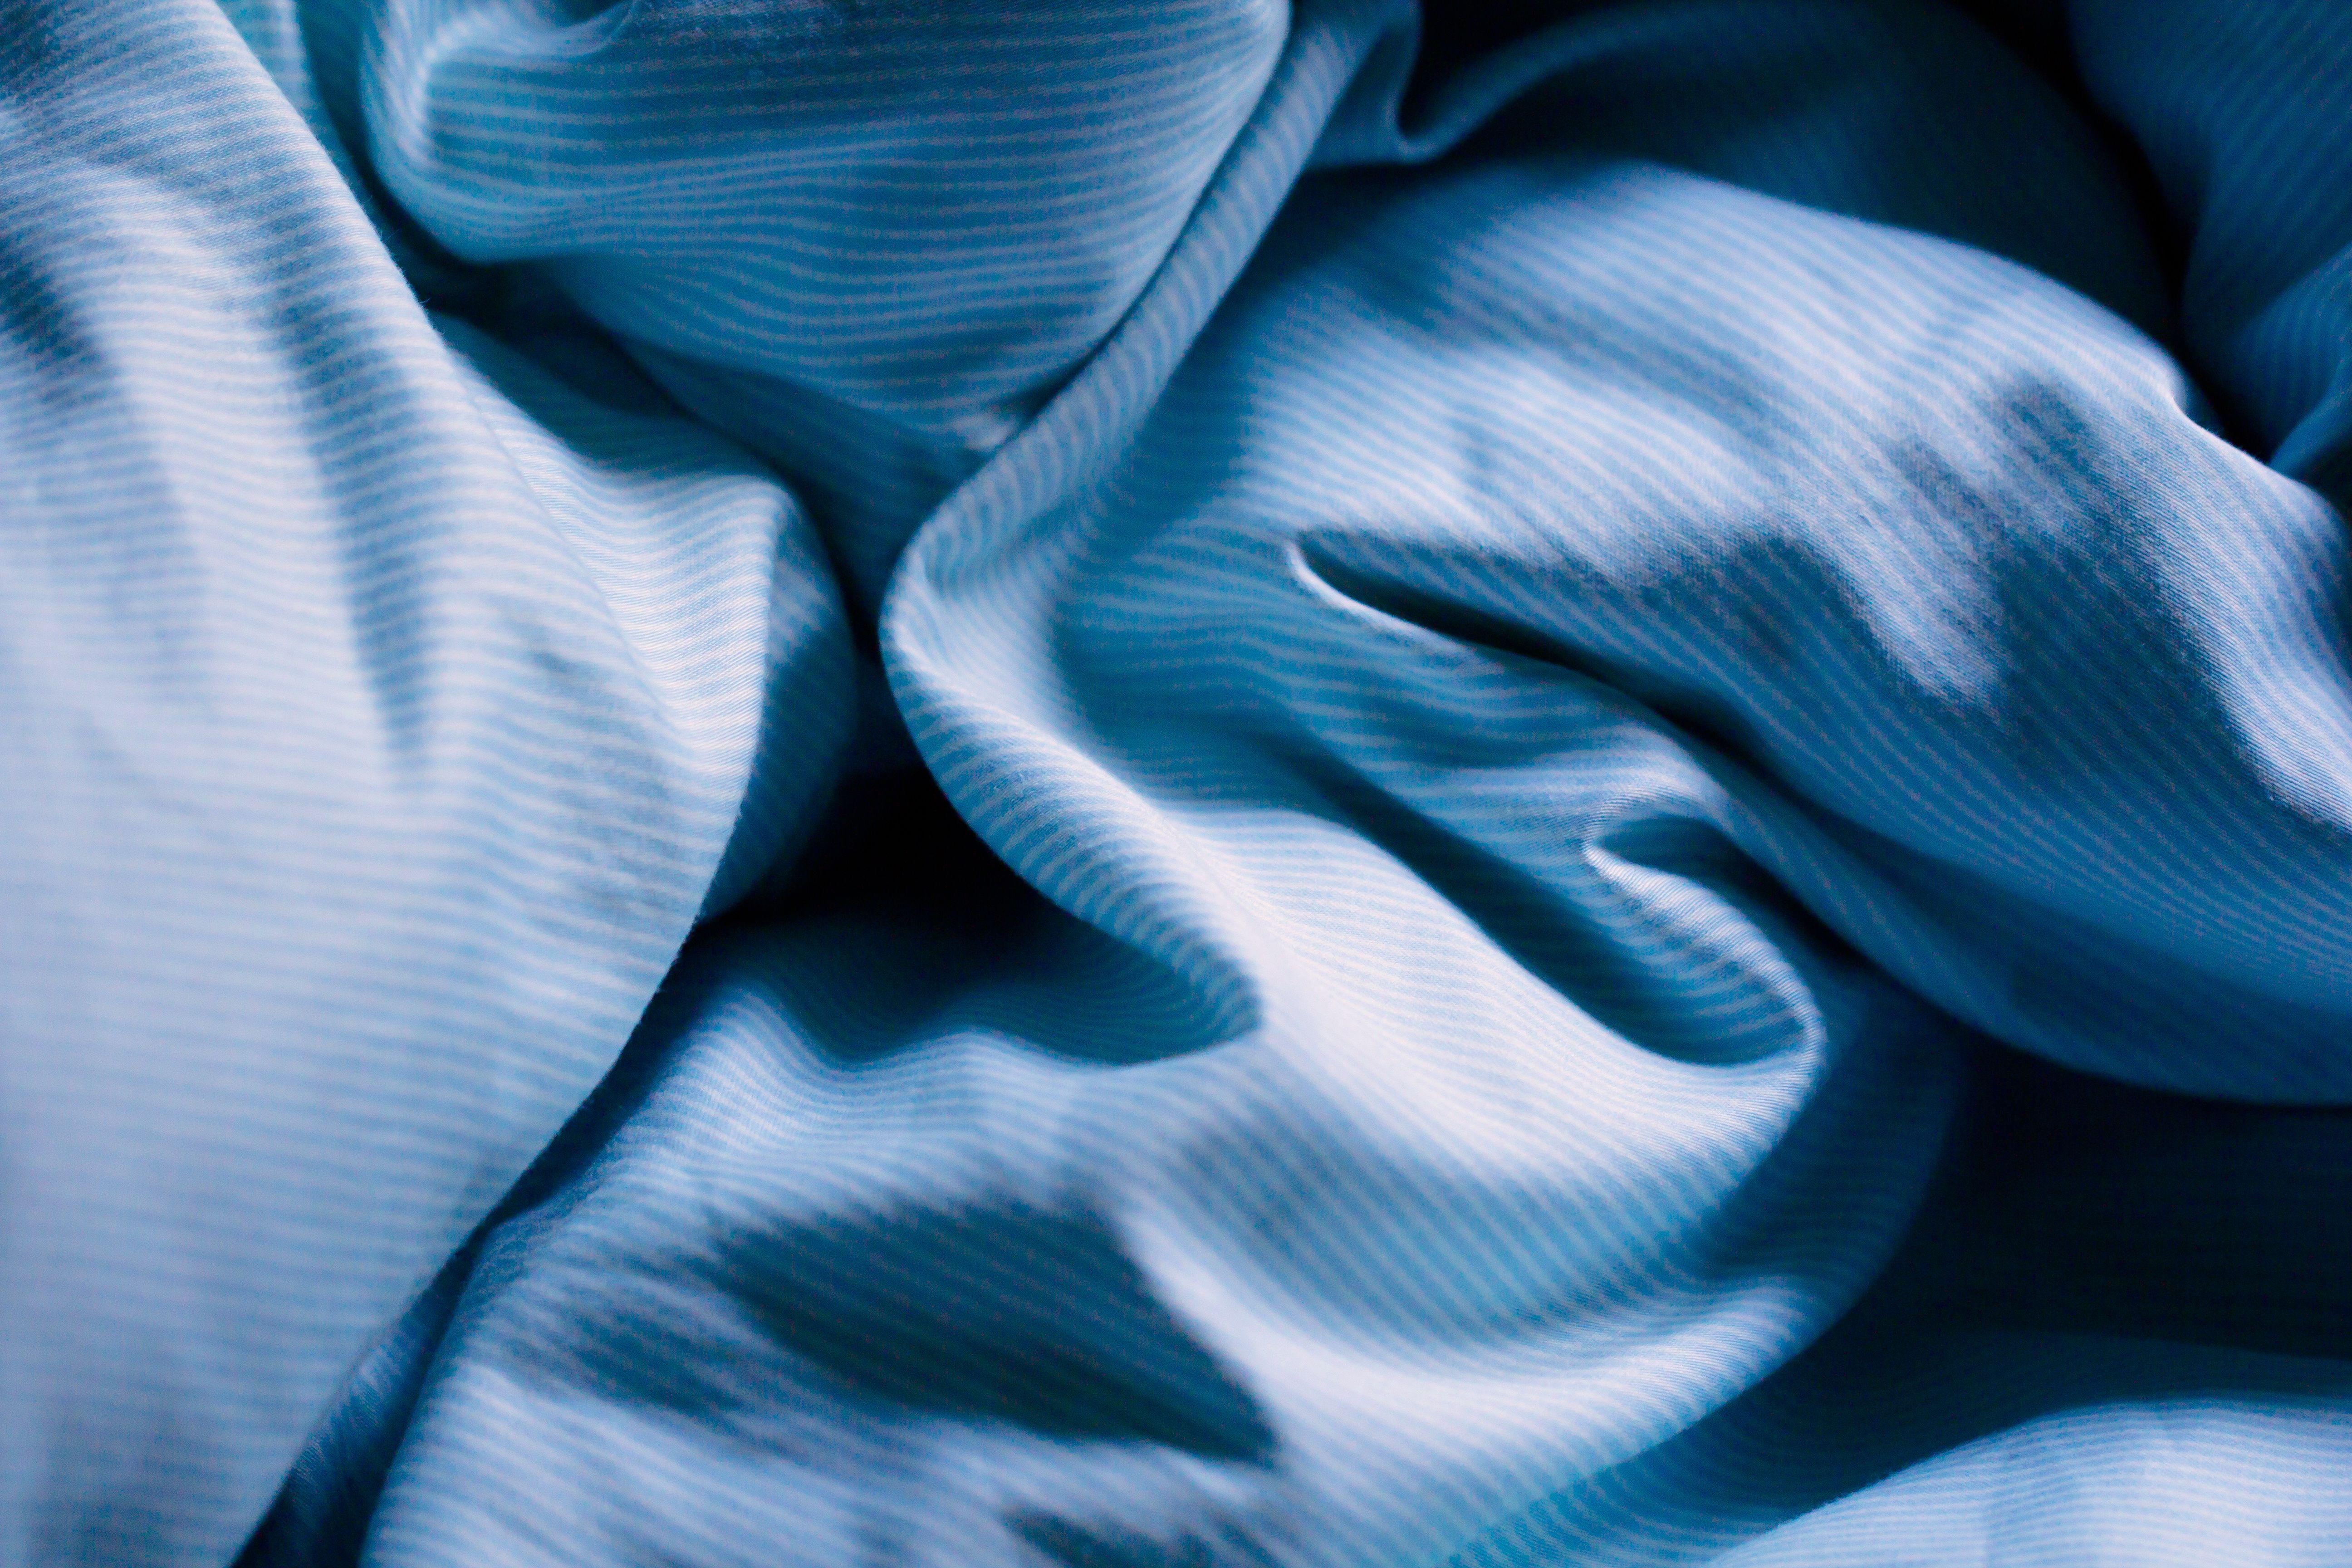 Wrinkled blue bed sheets on a morning as a background. Blue Lights